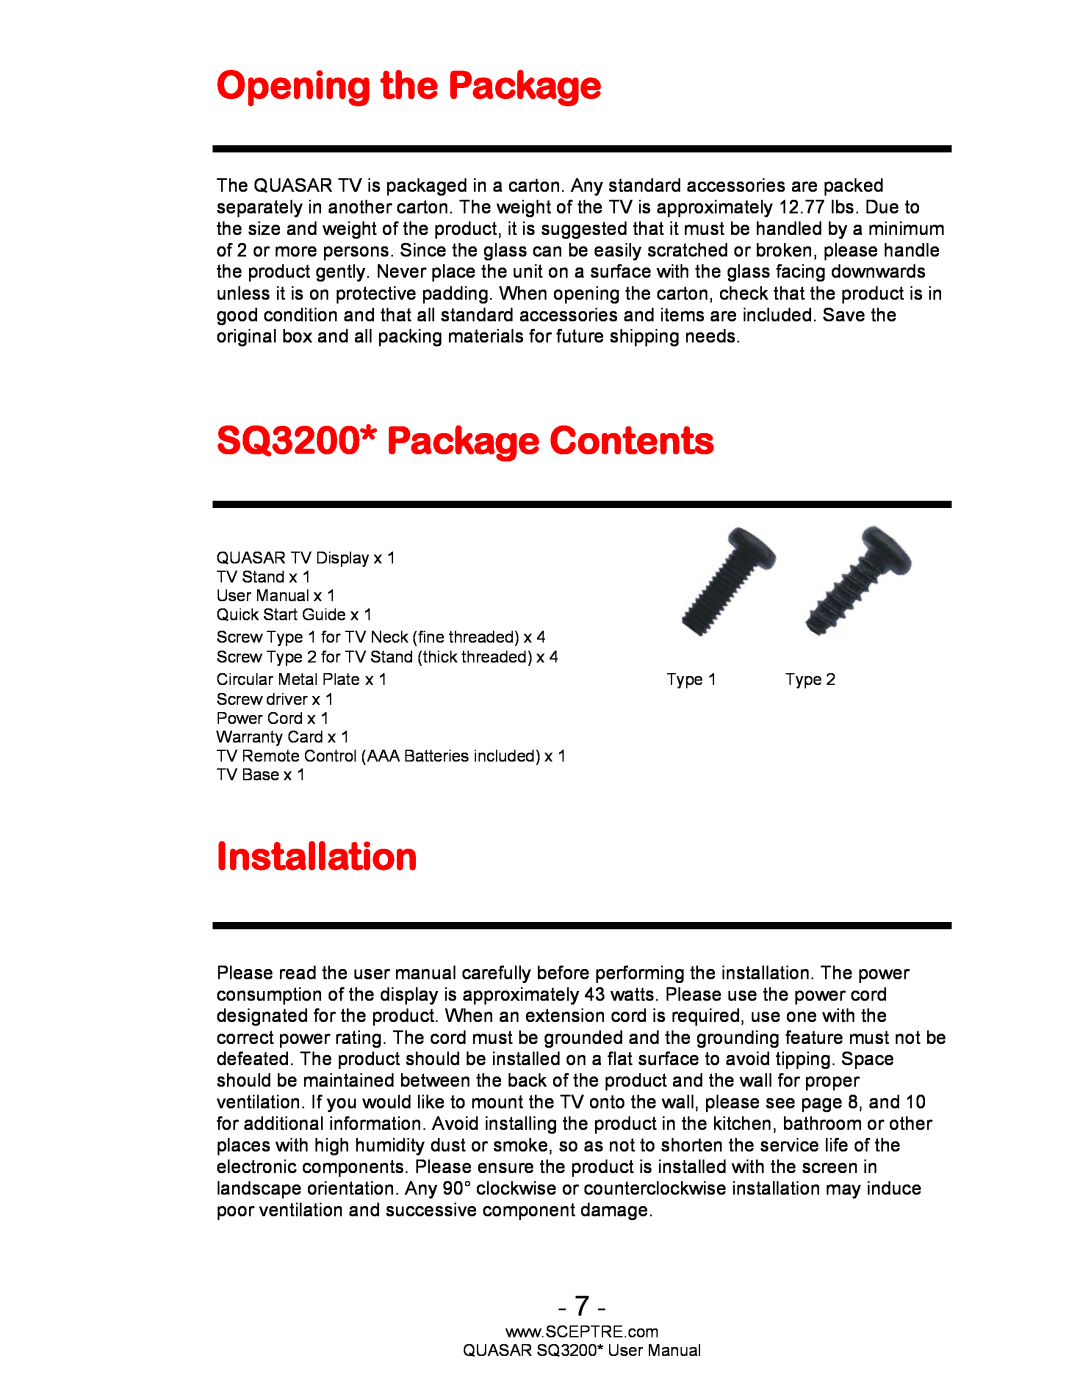 Sceptre Technologies HDTV user manual Opening the Package, SQ3200* Package Contents, Installation 